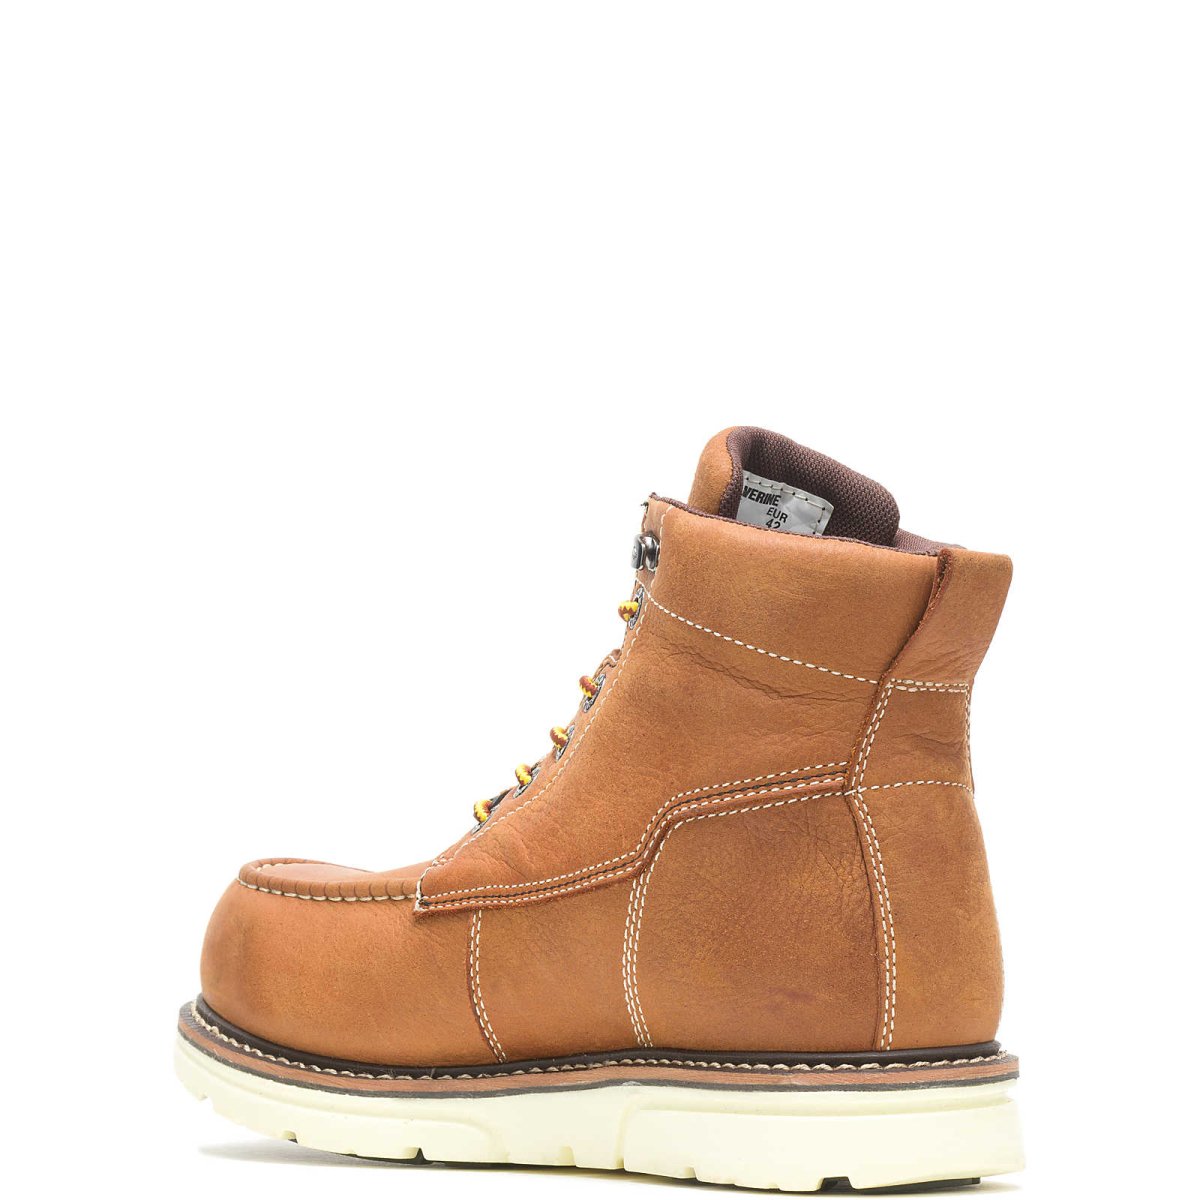 WOLVERINE I-90 DURASHOCKS® MOC-TOE CARBONMAX® 6" WORK BOOT (W201097) IN TAN - TLW Shoes